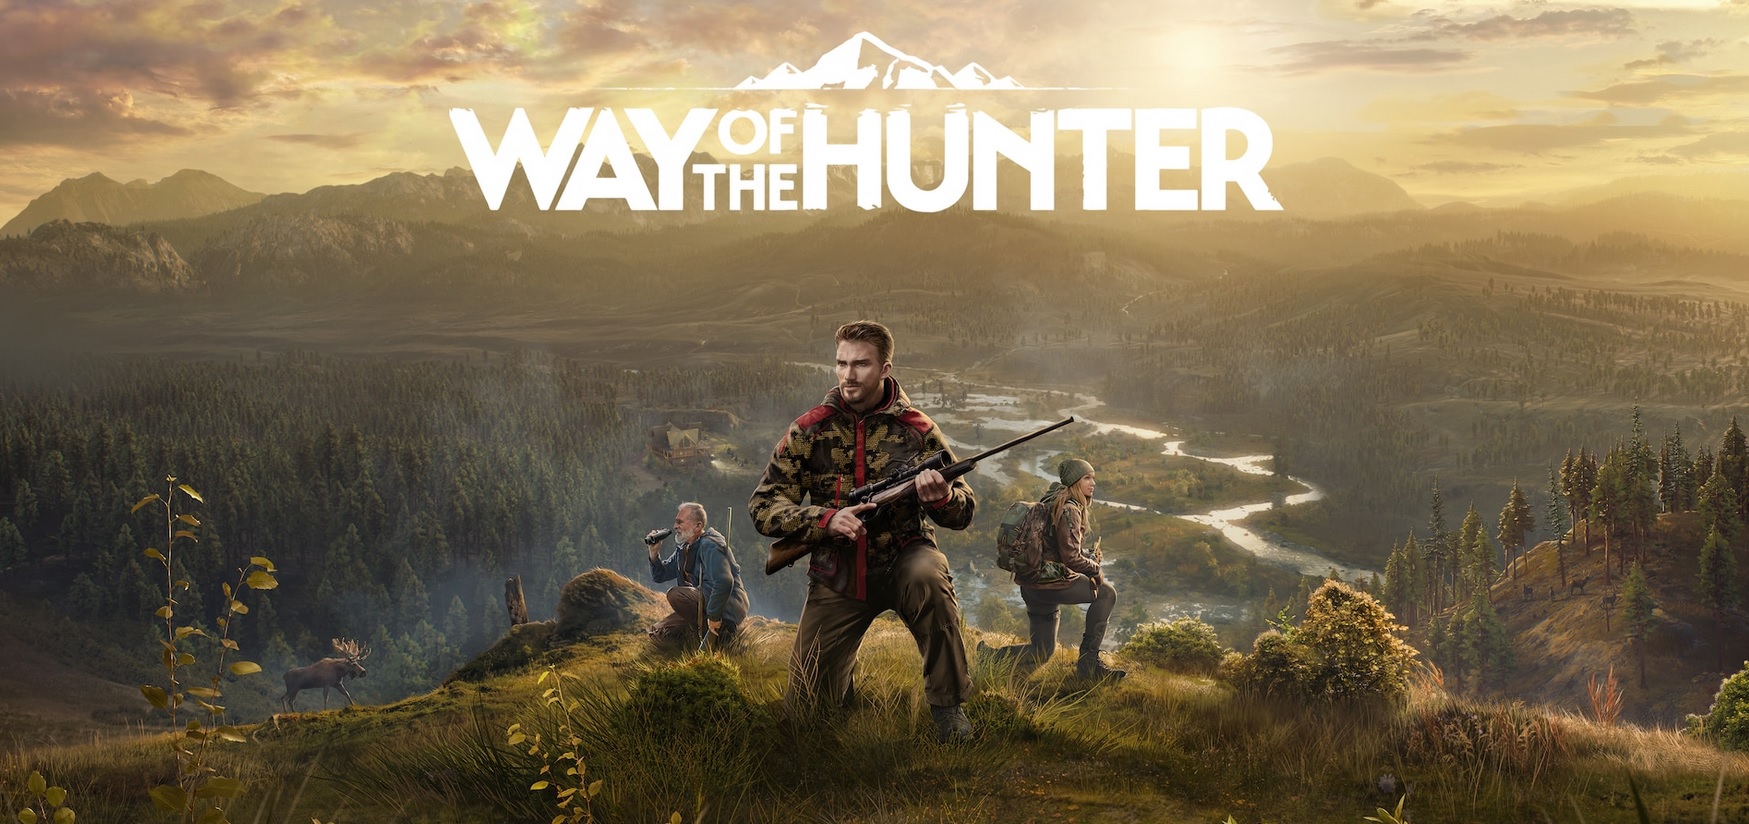 Way of the Hunter Recensione